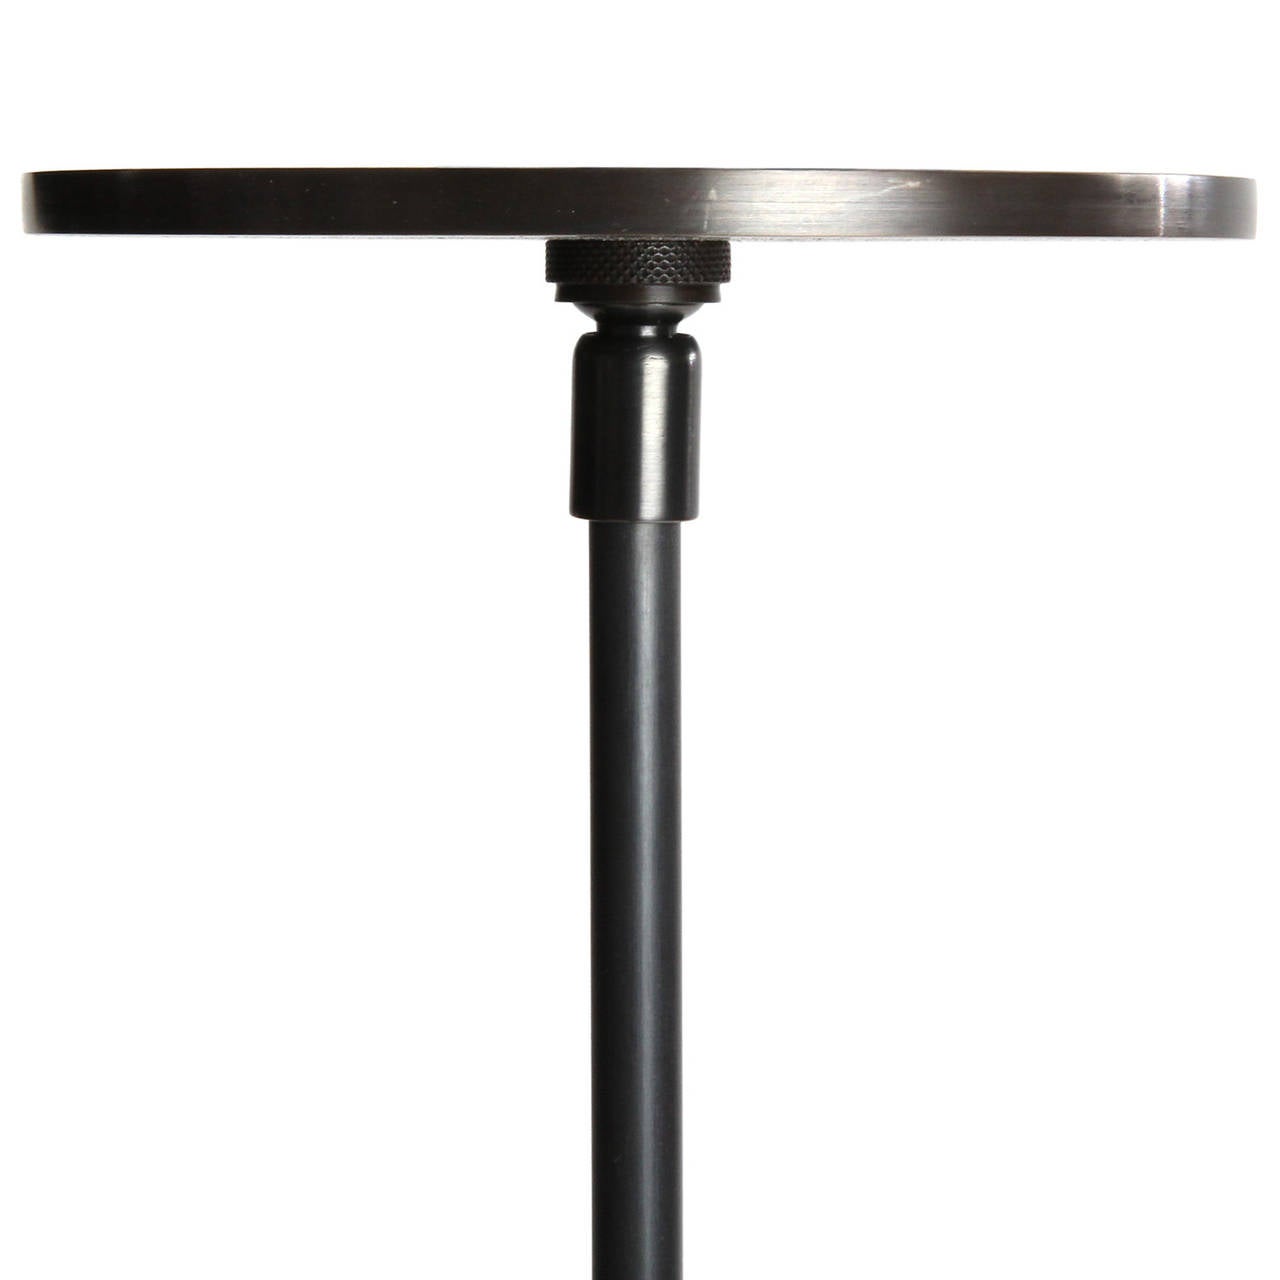 A spare and refined pendant lamp having a single Edison bulb attached to a nickeled steel rod and mounting plate.